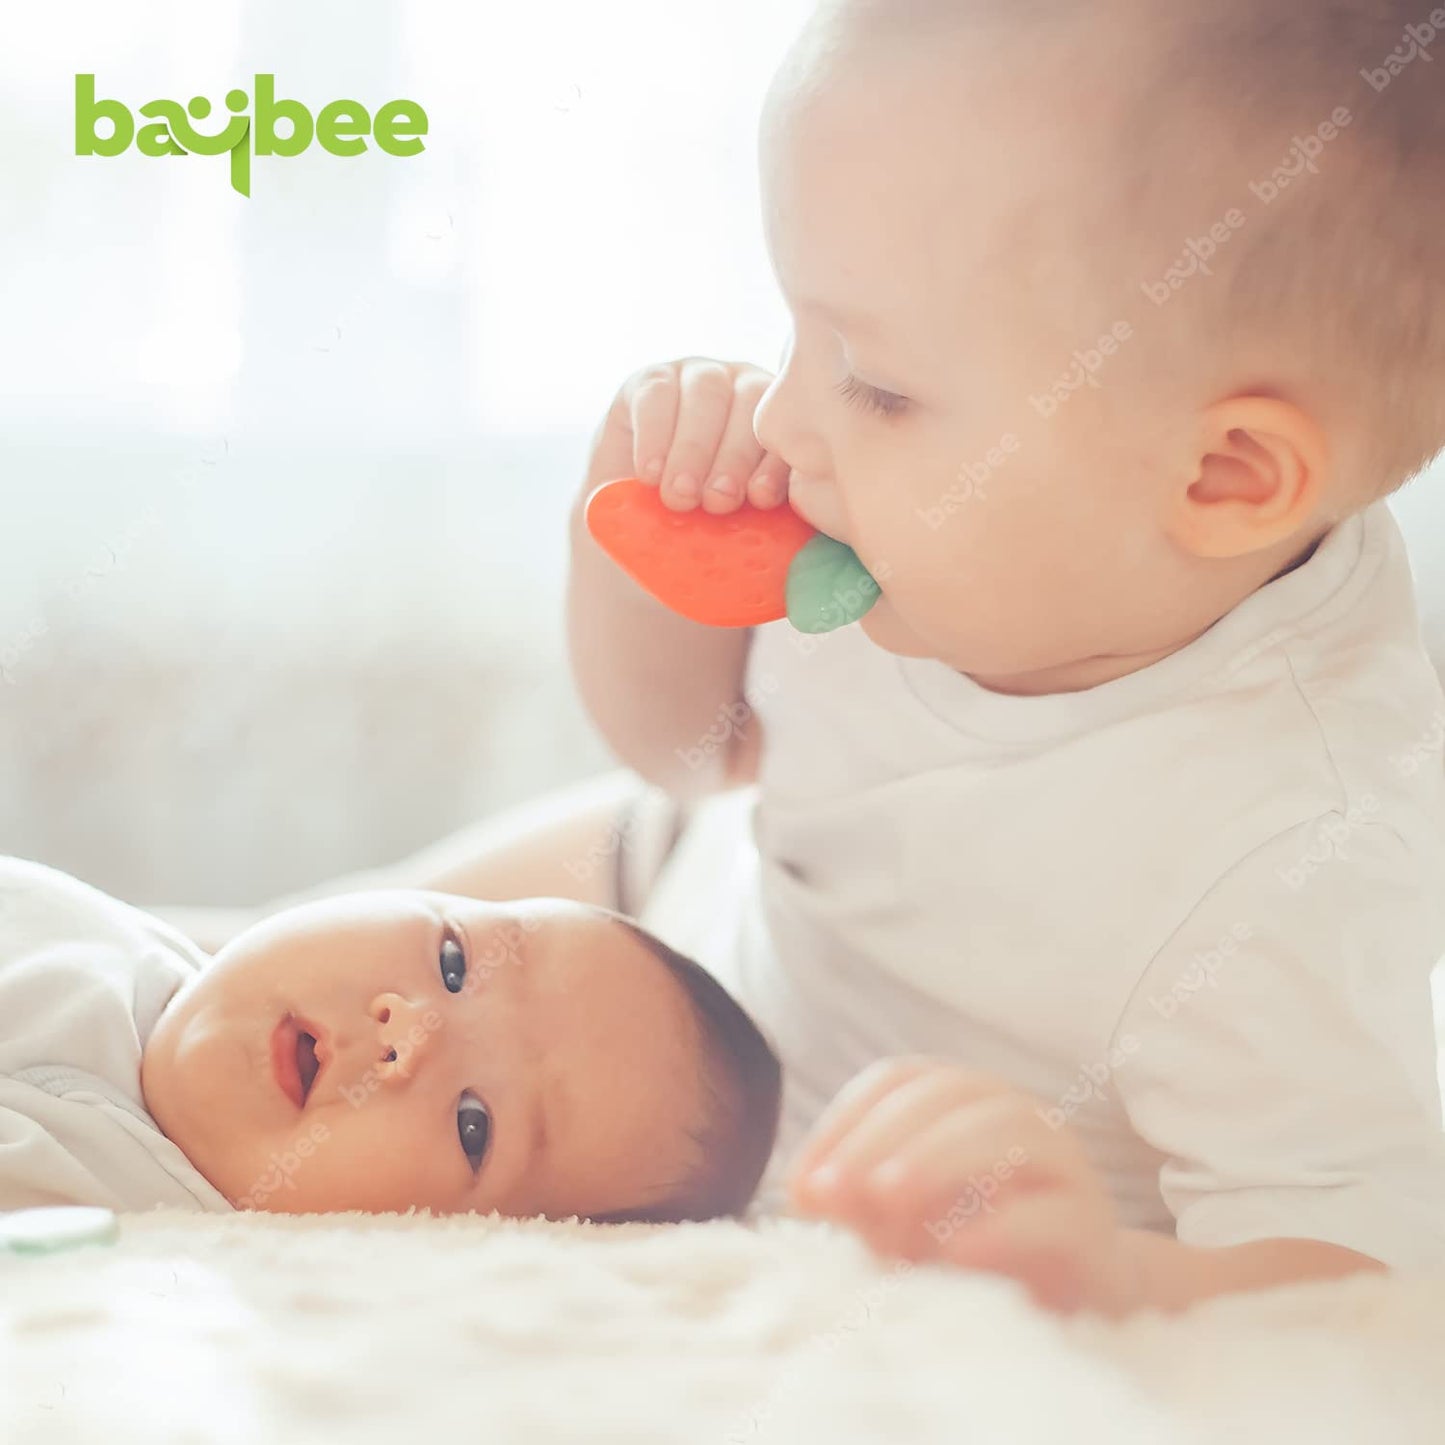 Baybee Pack of 3 Rattles Set for Babies 0-6 Months, Non-Toxic 3 Attractive Rattle Set, Newborn Baby Gift Products